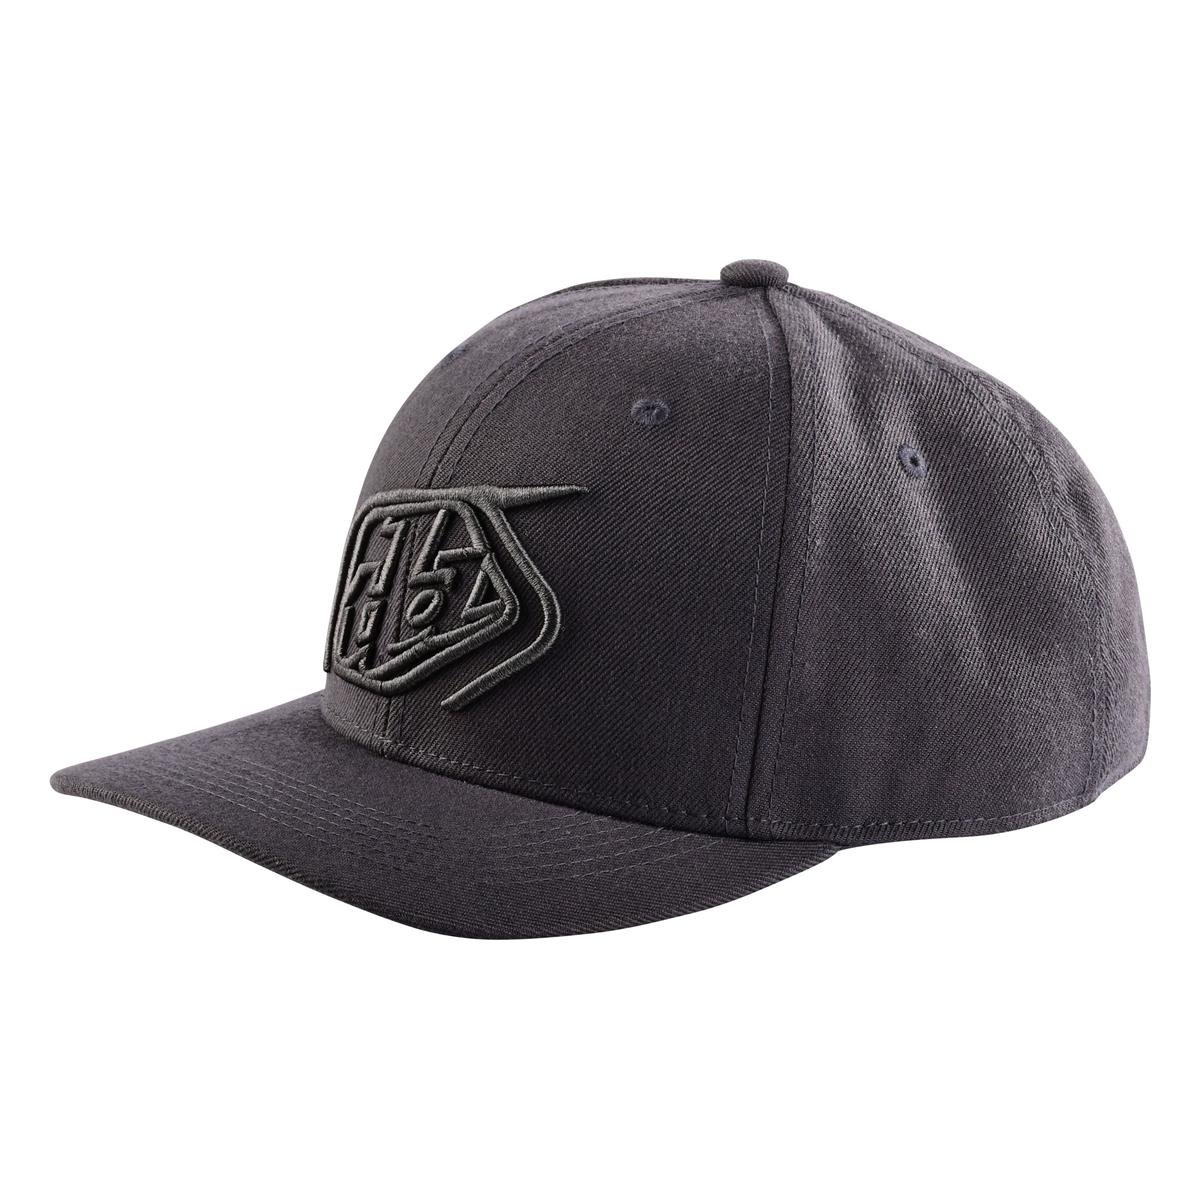 Troy Lee Designs 9Forty Casquette Snap Back Crop Gris/Charcoal